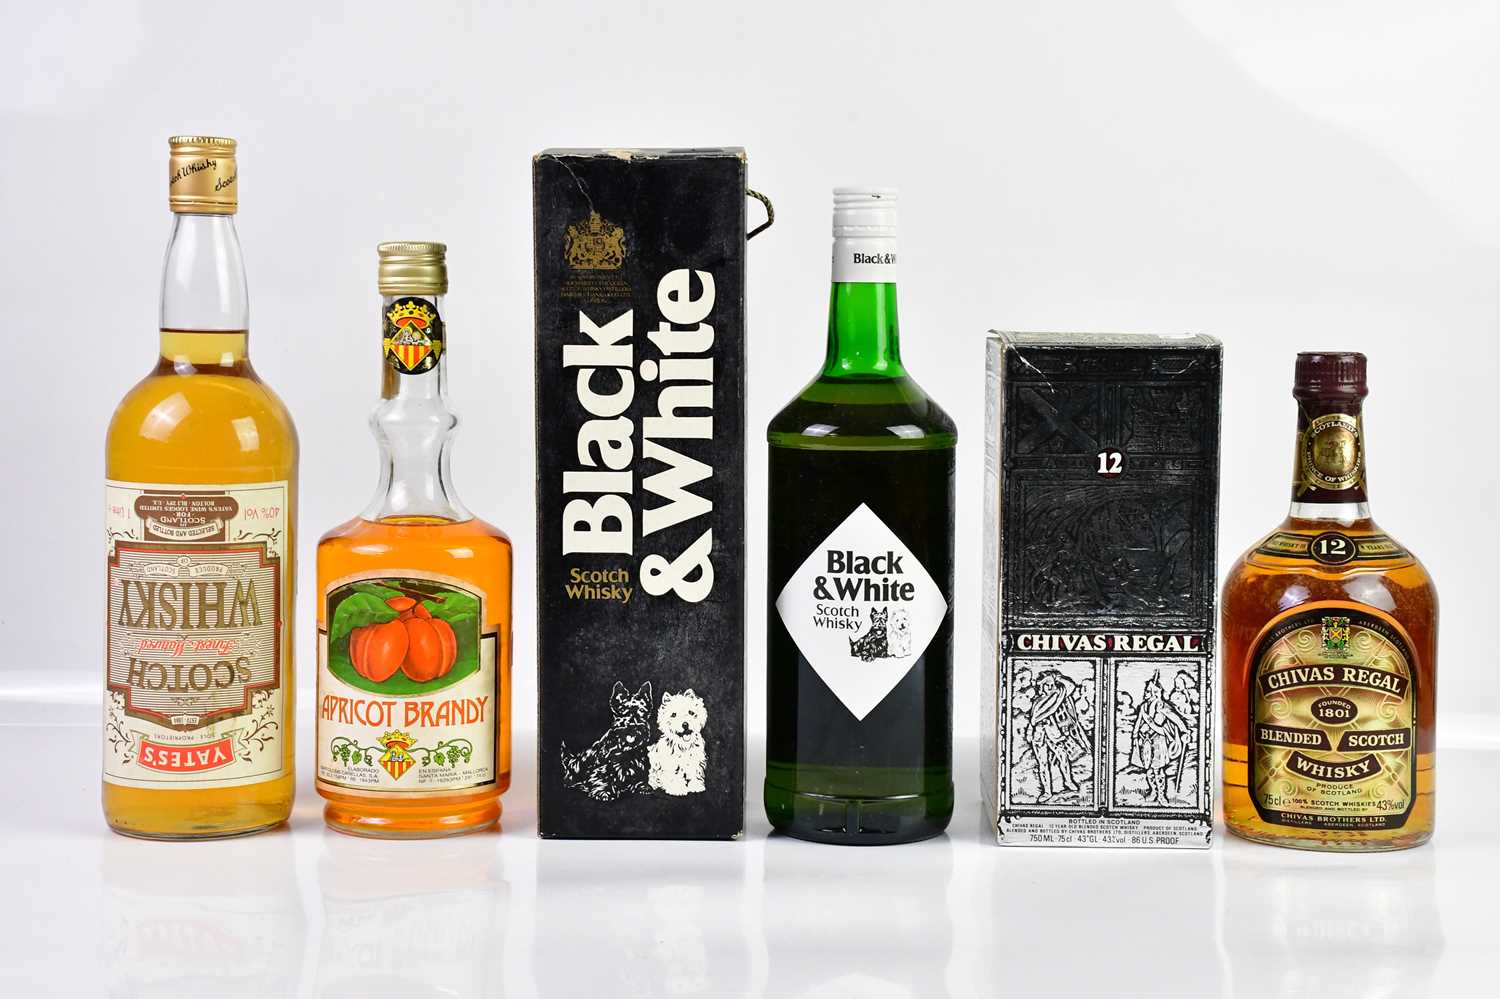 MIXED SPIRITS; a bottle of Chivas Regal 12 years old, Black & White Scotch whisky, Yates's Finest